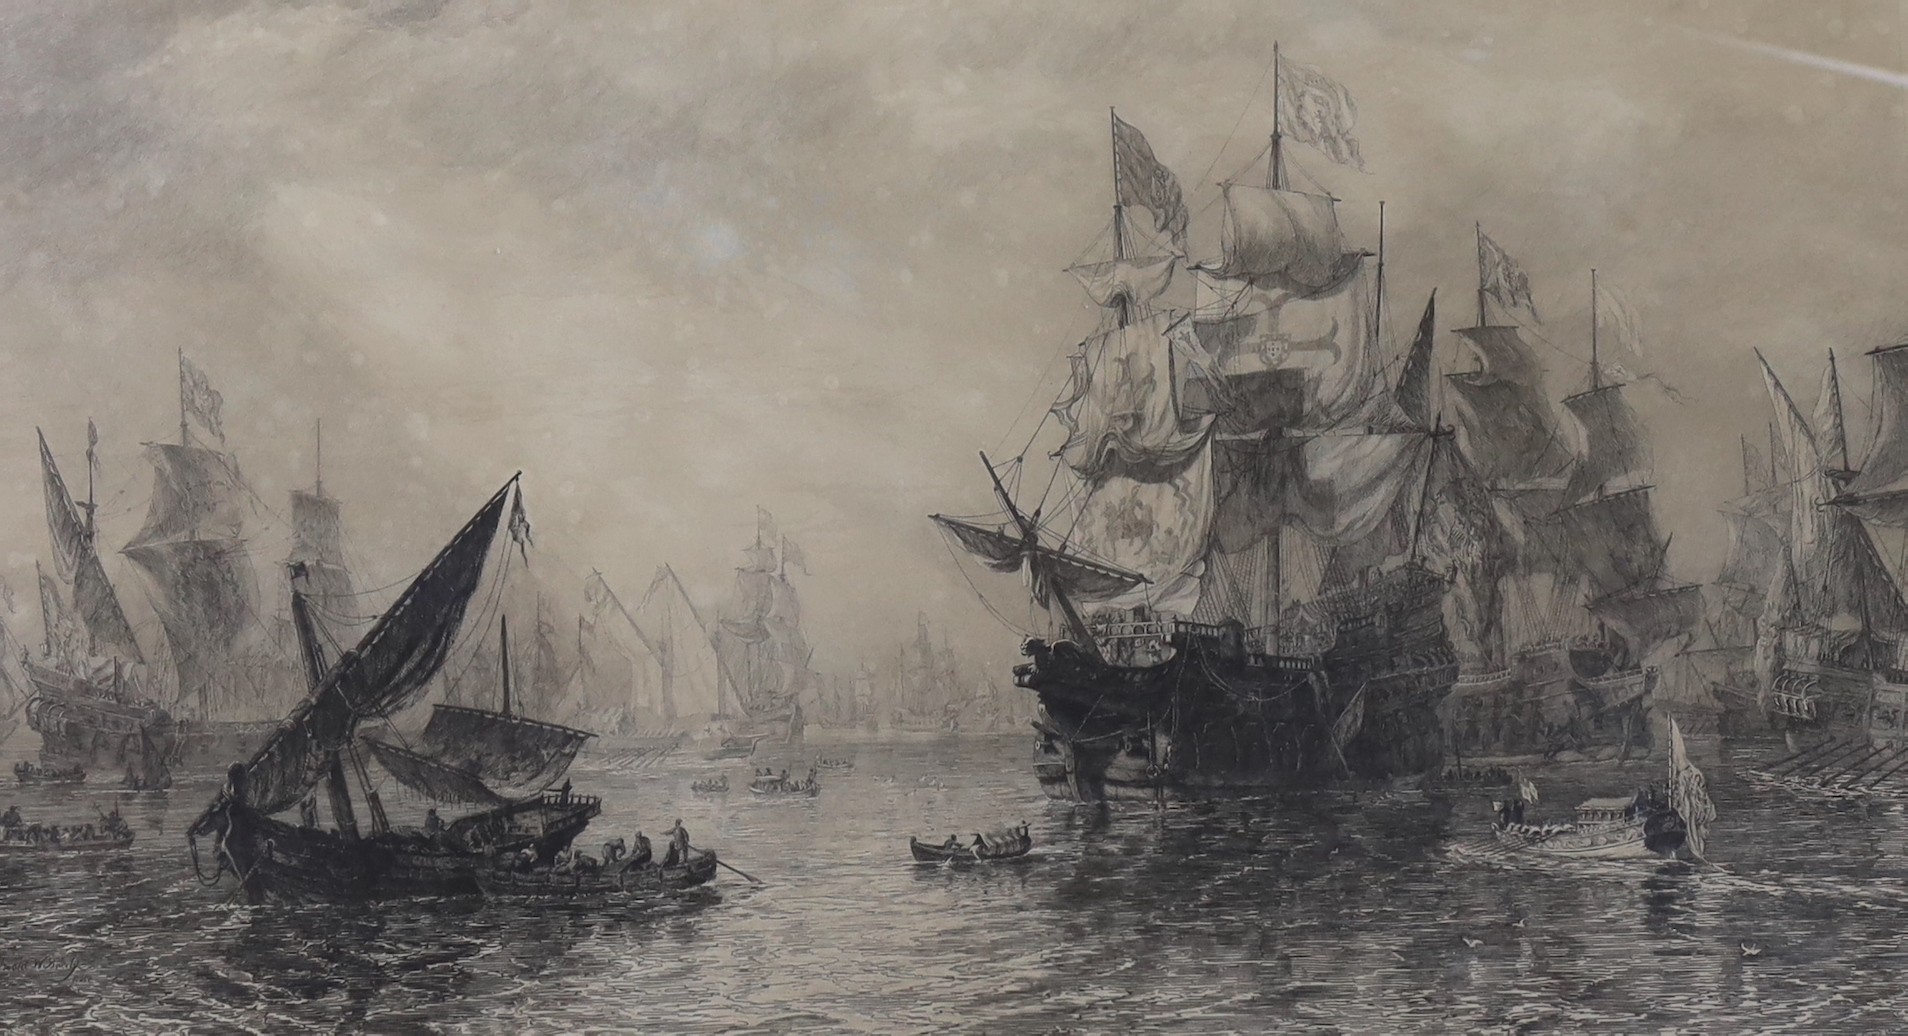 David Law after Oswald Brierly, engraving, The Spanish Armada sailing from Ferrol 12th July 1588, signed in pencil by both artists, overall 48 x 74cm